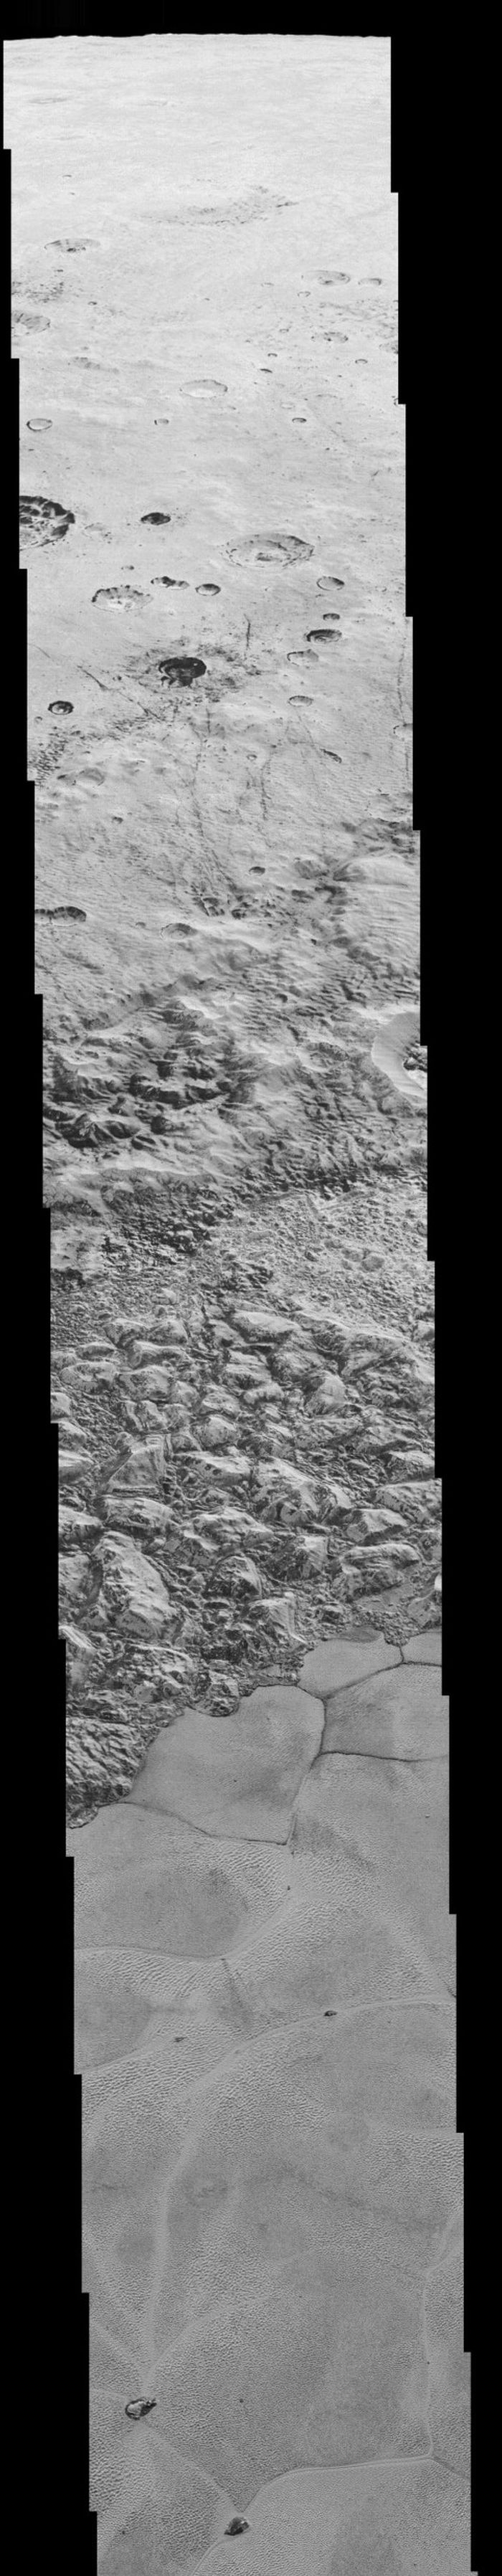 A stitch of the high-resolution images NASA has provided of Pluto.